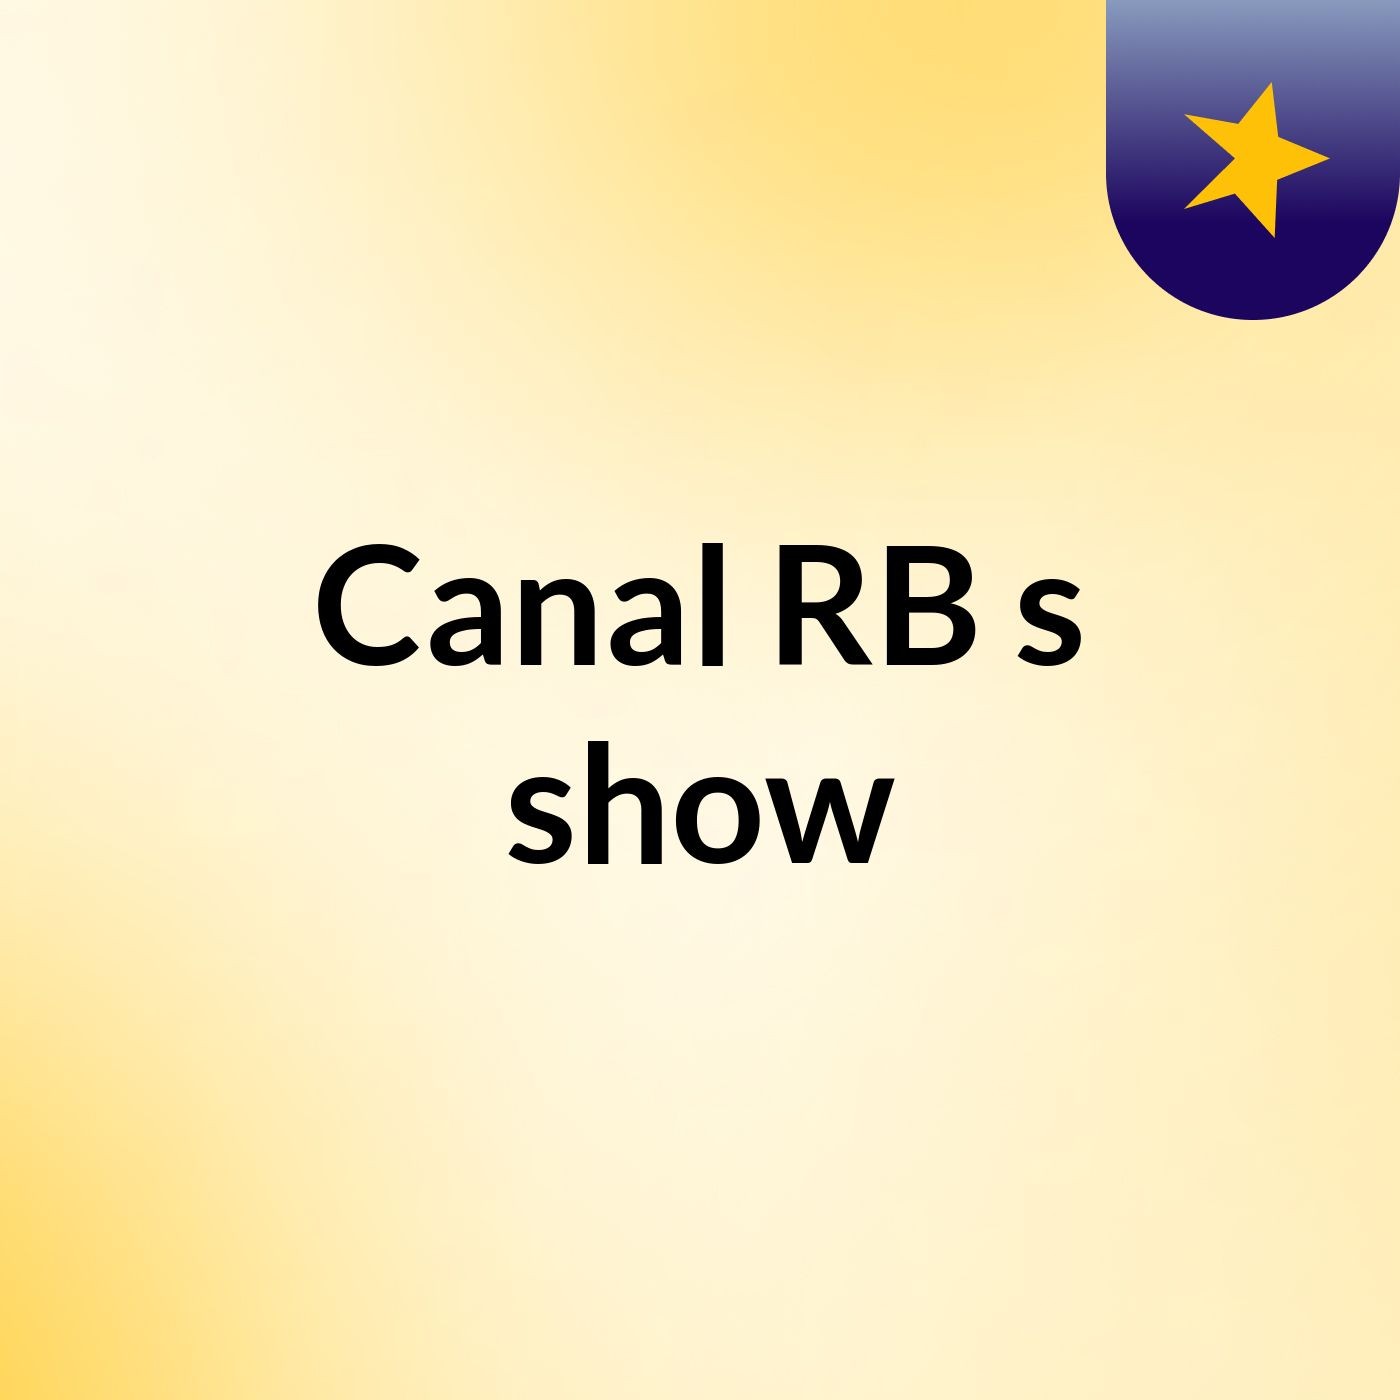 Canal RB's show